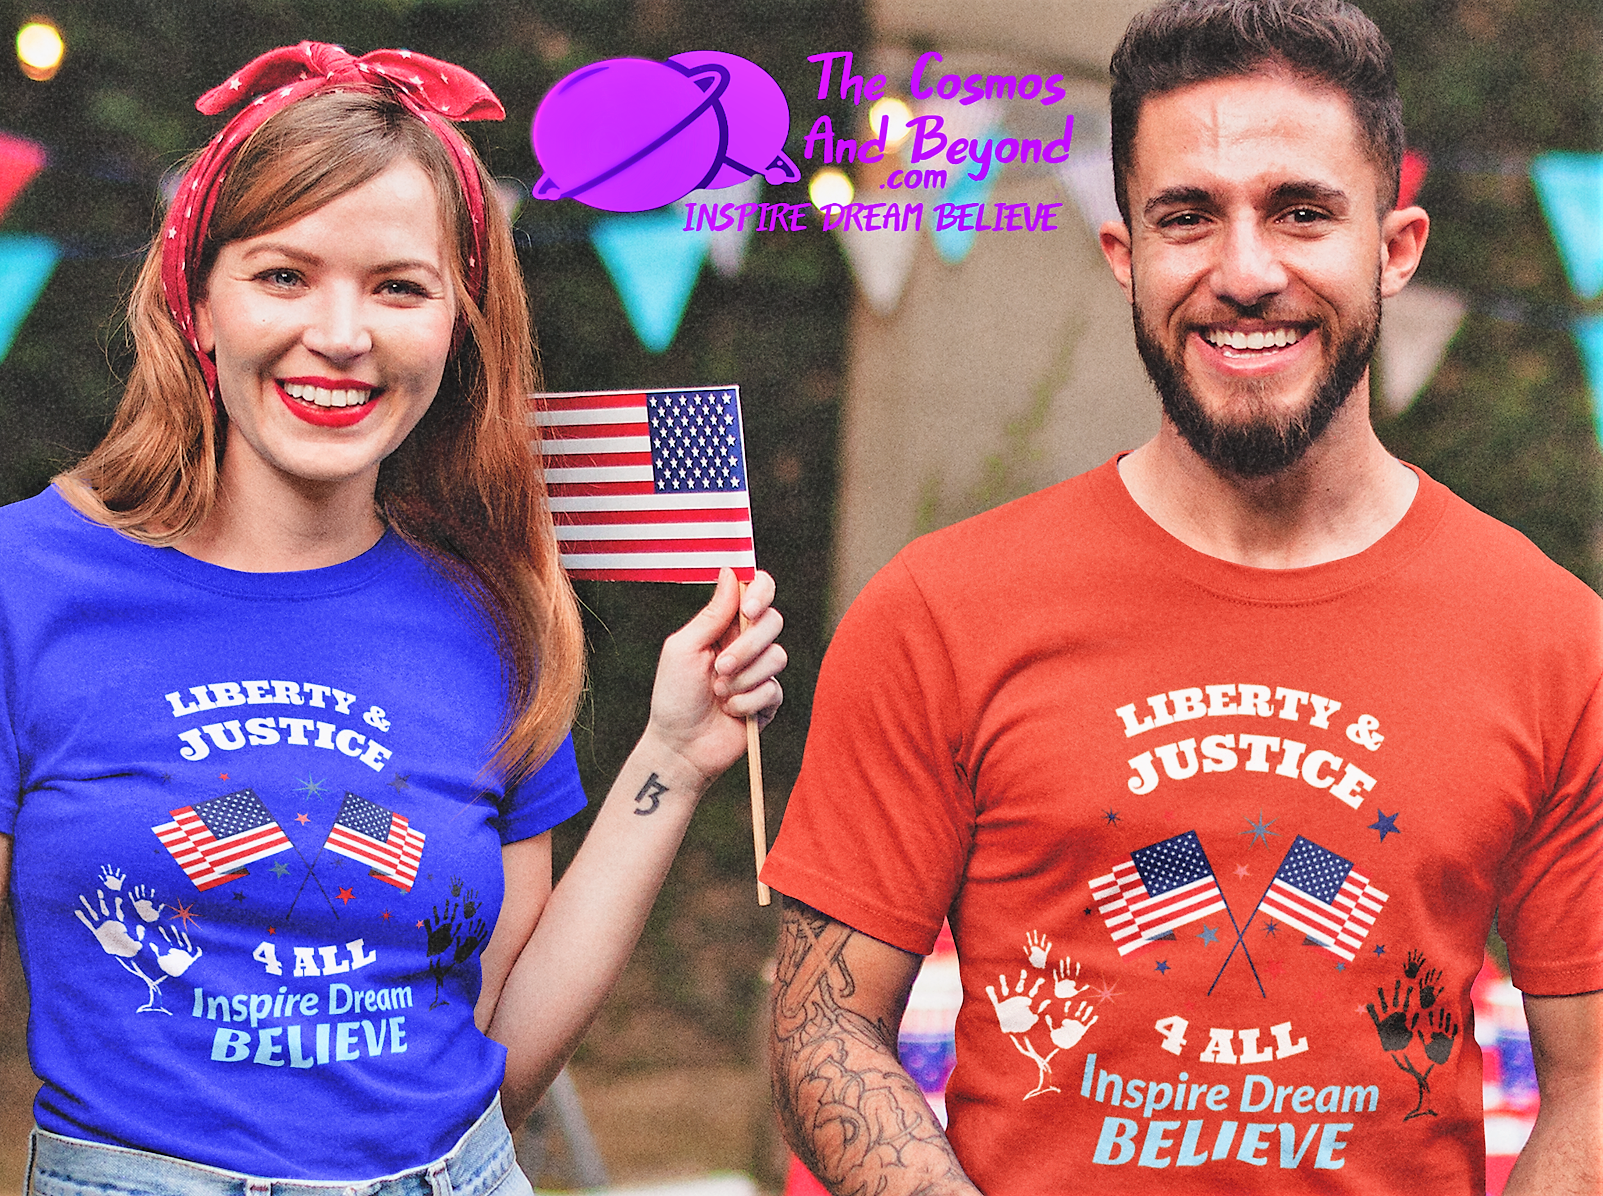 LIBERTY & JUSTICE 4 ALL Inspire Dream BELIEVE 4th of July t-shirt fun gift